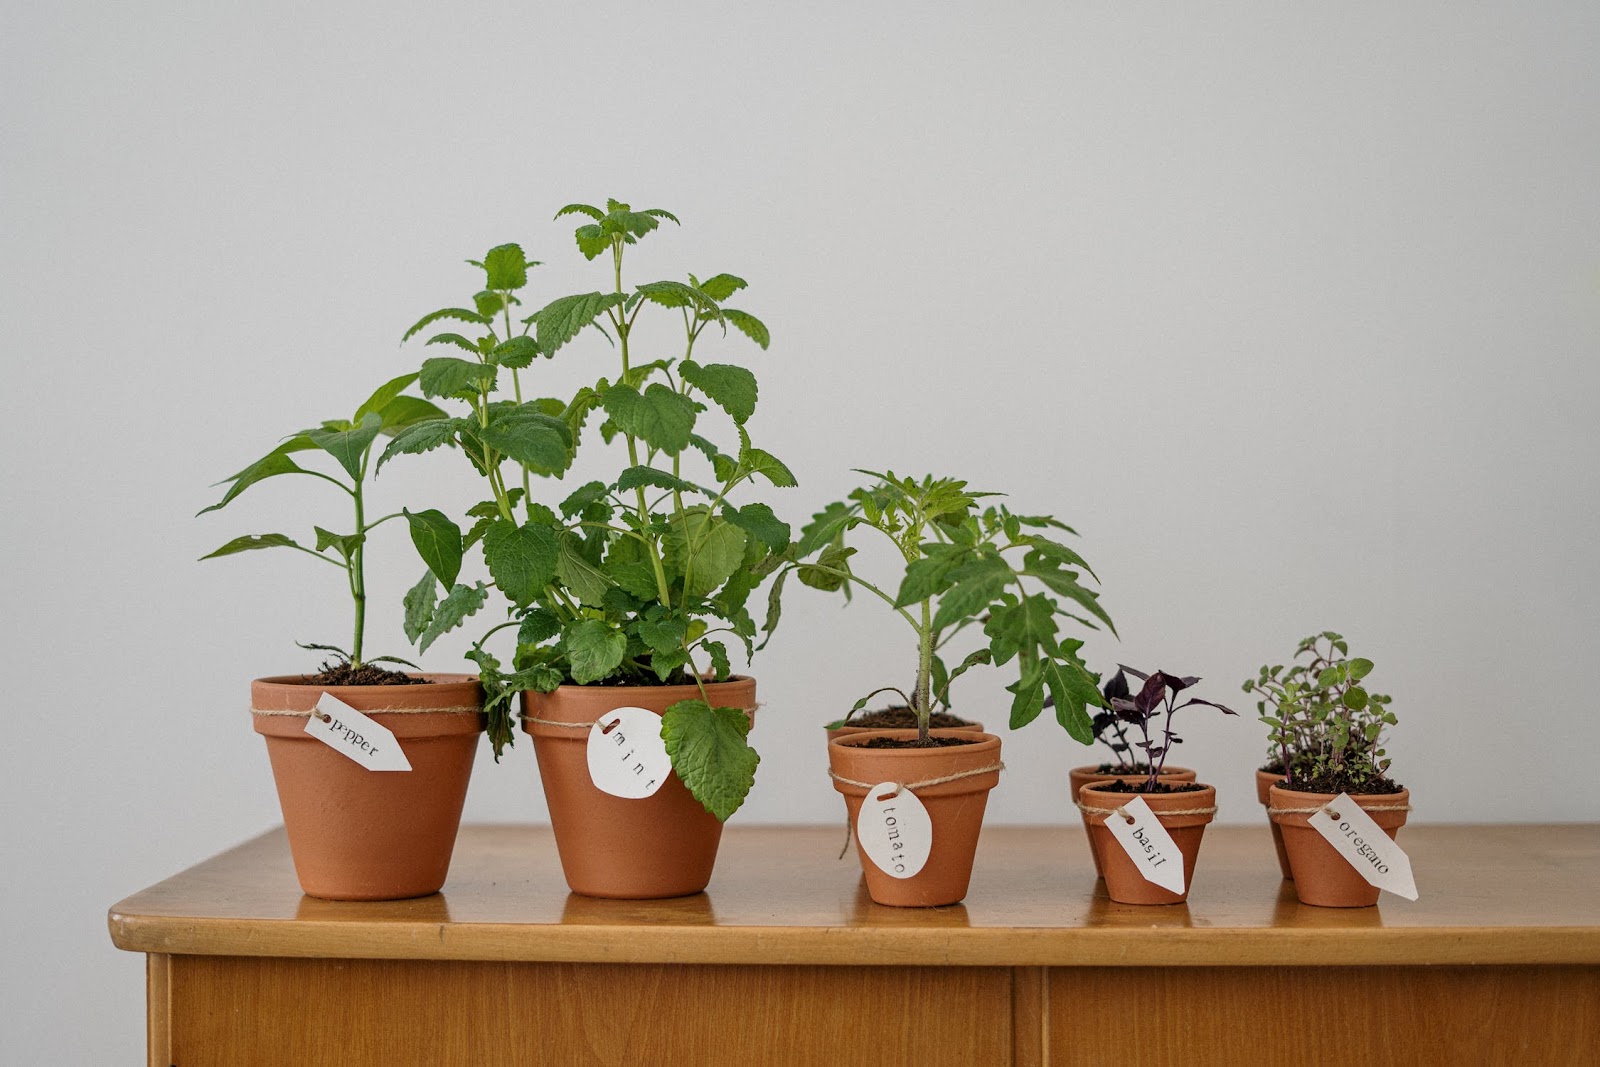 Plans of varying sizes in pots on a table